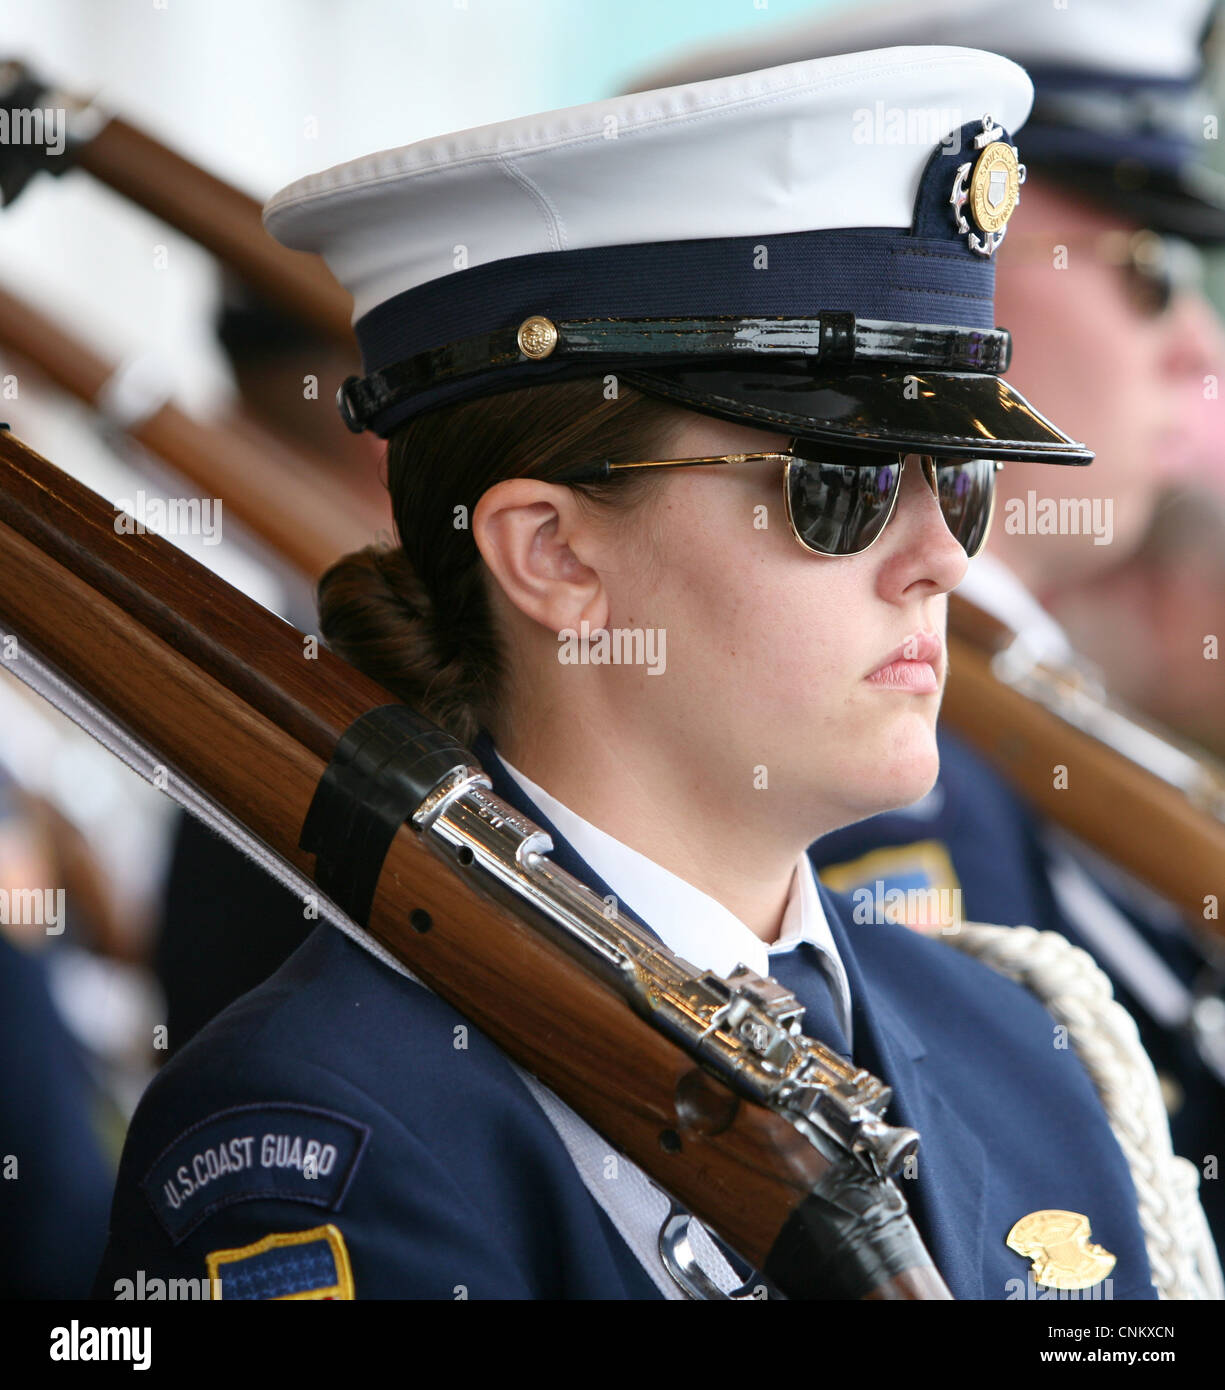 Seaman Emily Greenhouse, a member of the U.S. Coast Guard Honor Guard, performs during the The War of 1812 Bicentennial Commemoration in New Orleans. The events are part of a series of city visits by the Navy, Coast Guard, Marine Corps and Operation Sail beginning in April 2012 and concluding in 2015. New Orleans is the first and the last city visit in the series. Stock Photo